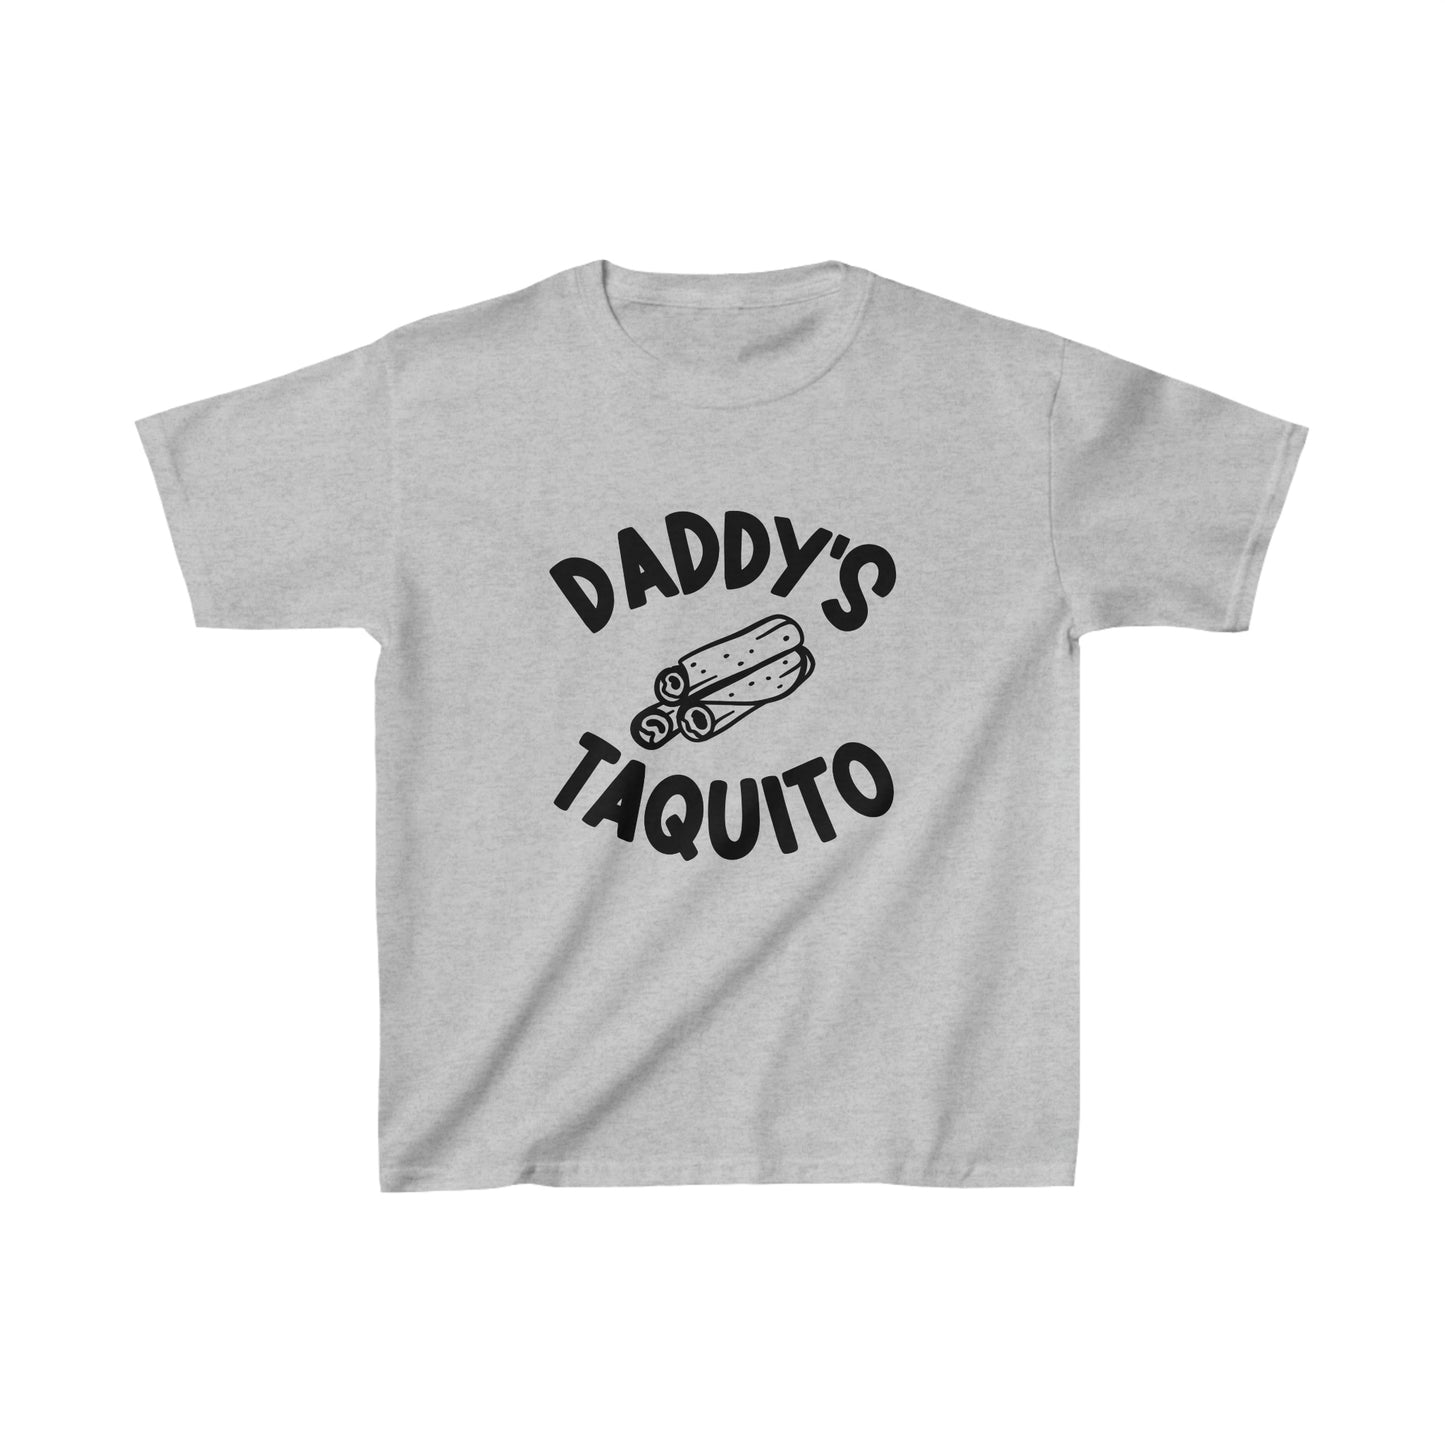 DADDY'S TAQUITO KID'S T-SHIRT